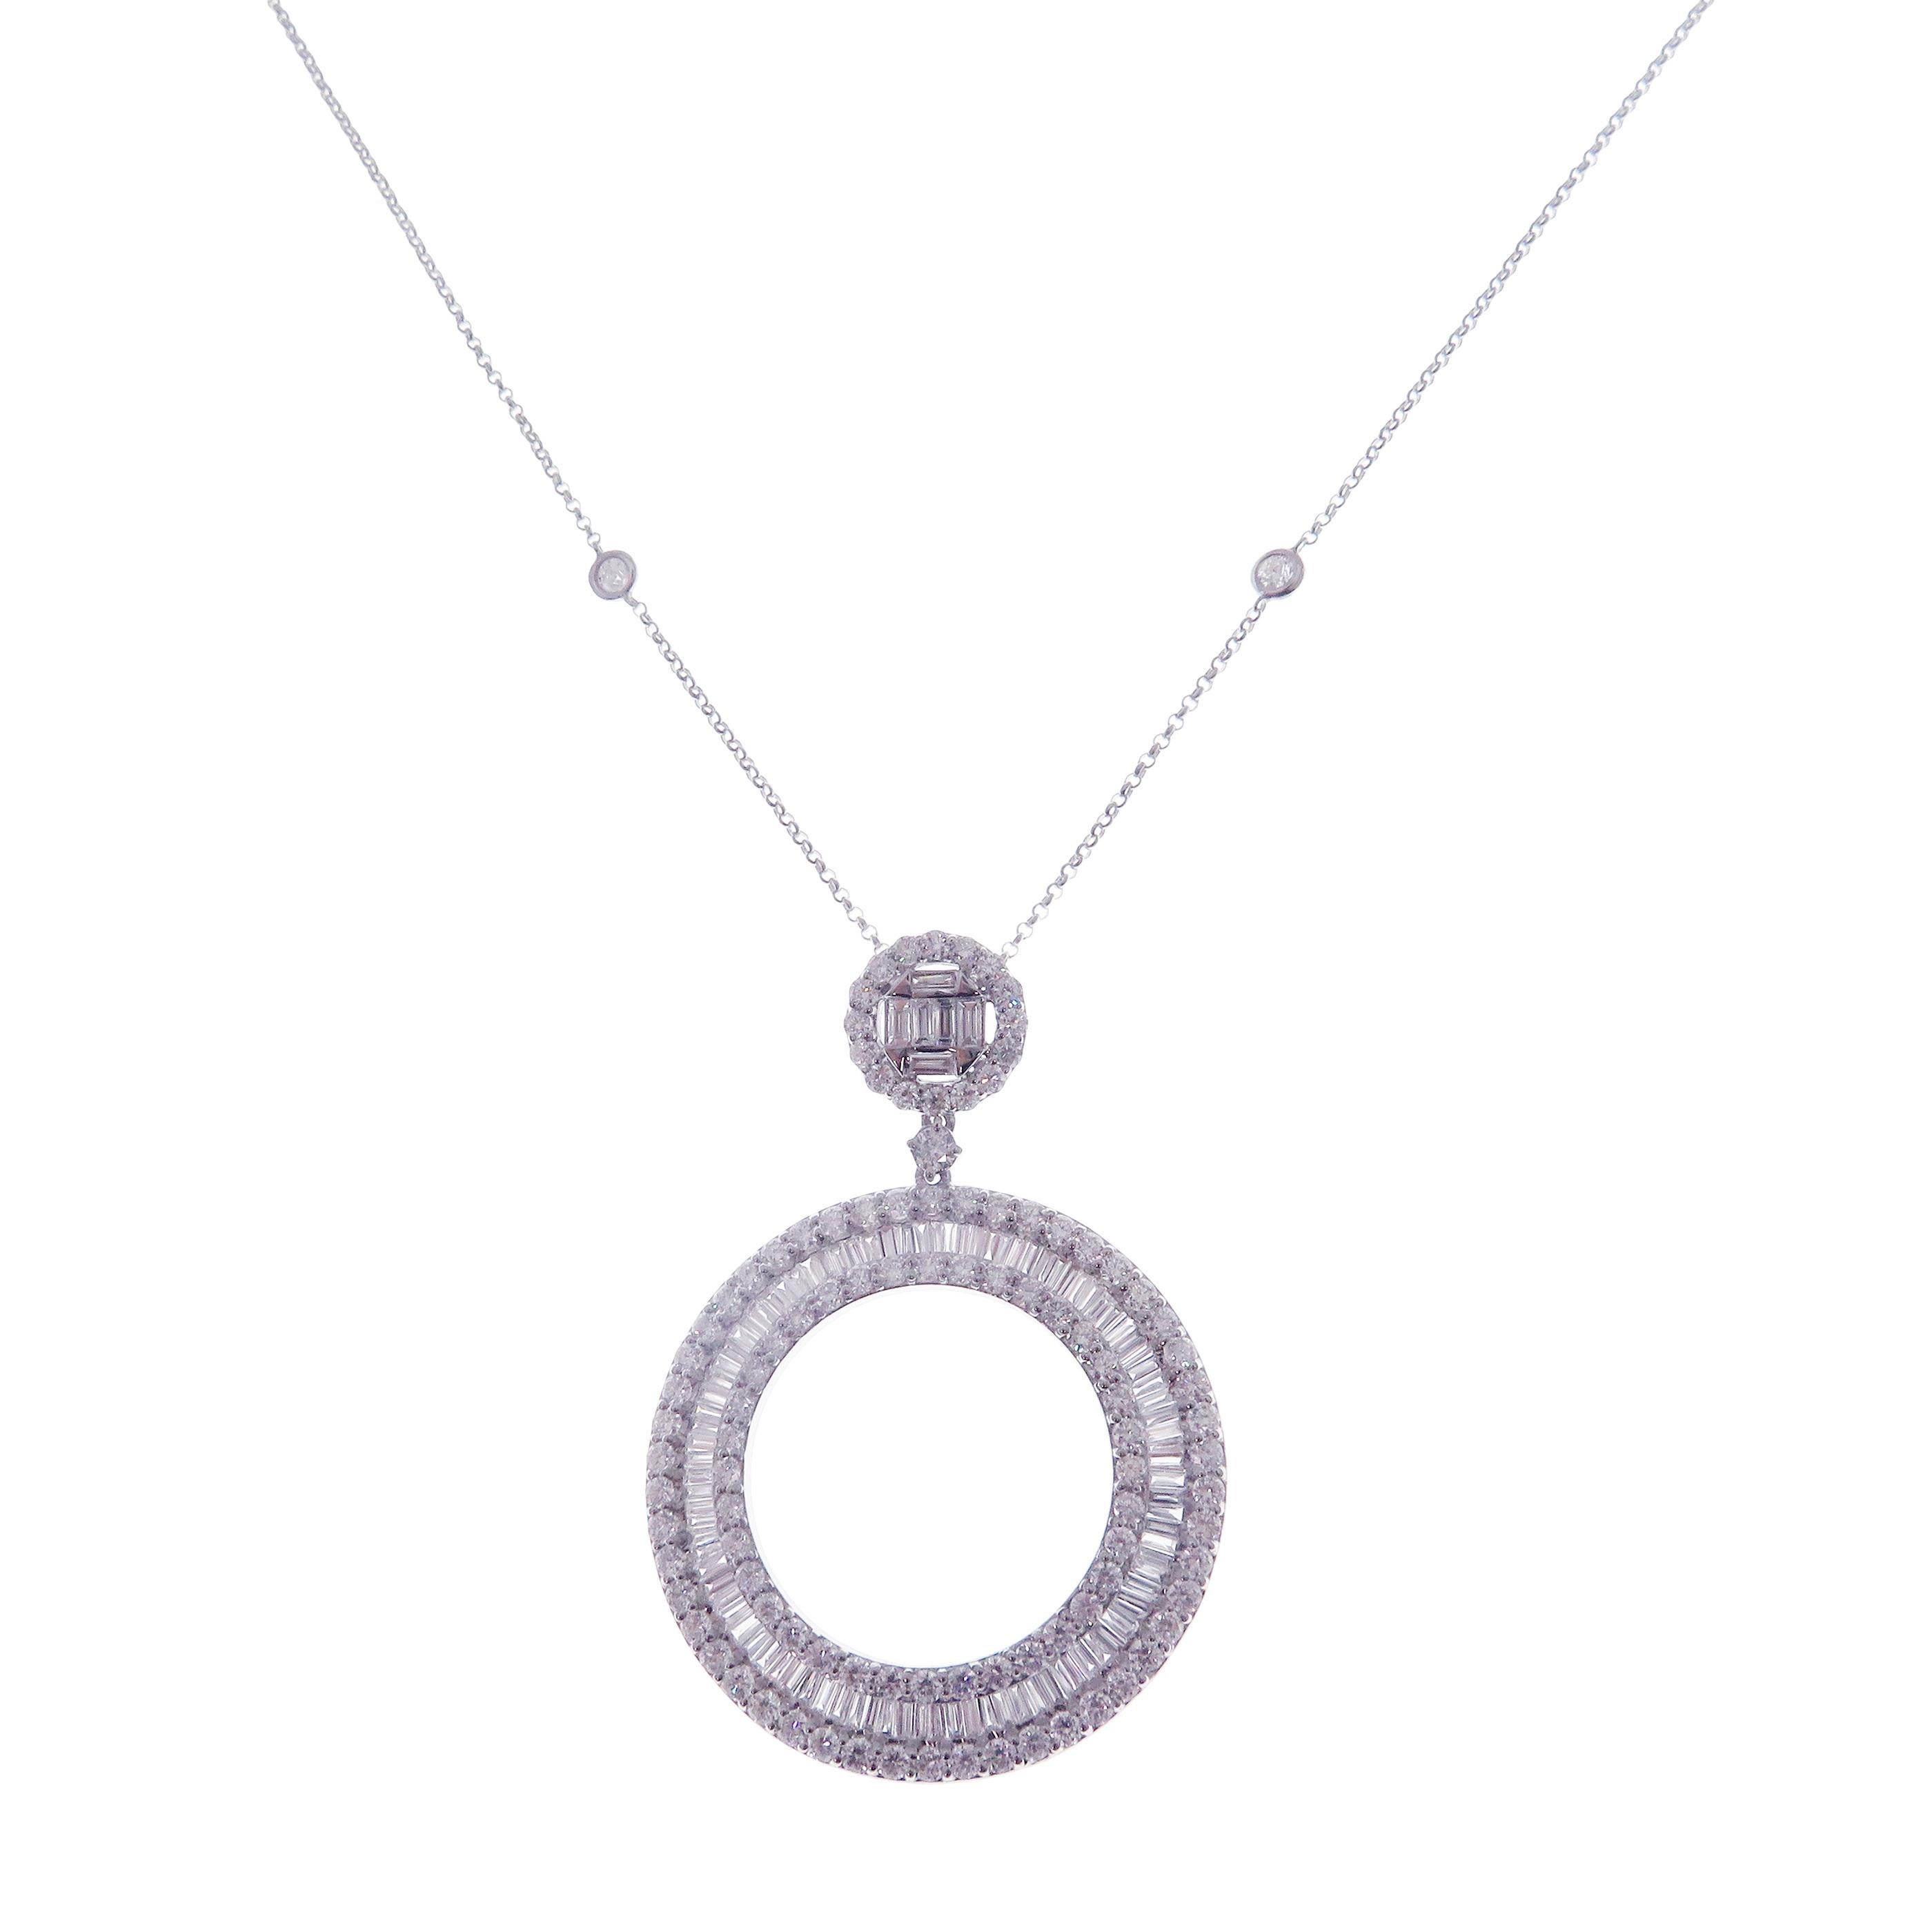 This diamond hollow circle necklace is crafted in 18-karat white gold, weighing approximately 5.50 total carats of SI-H Quality white diamonds.

Necklace is 16